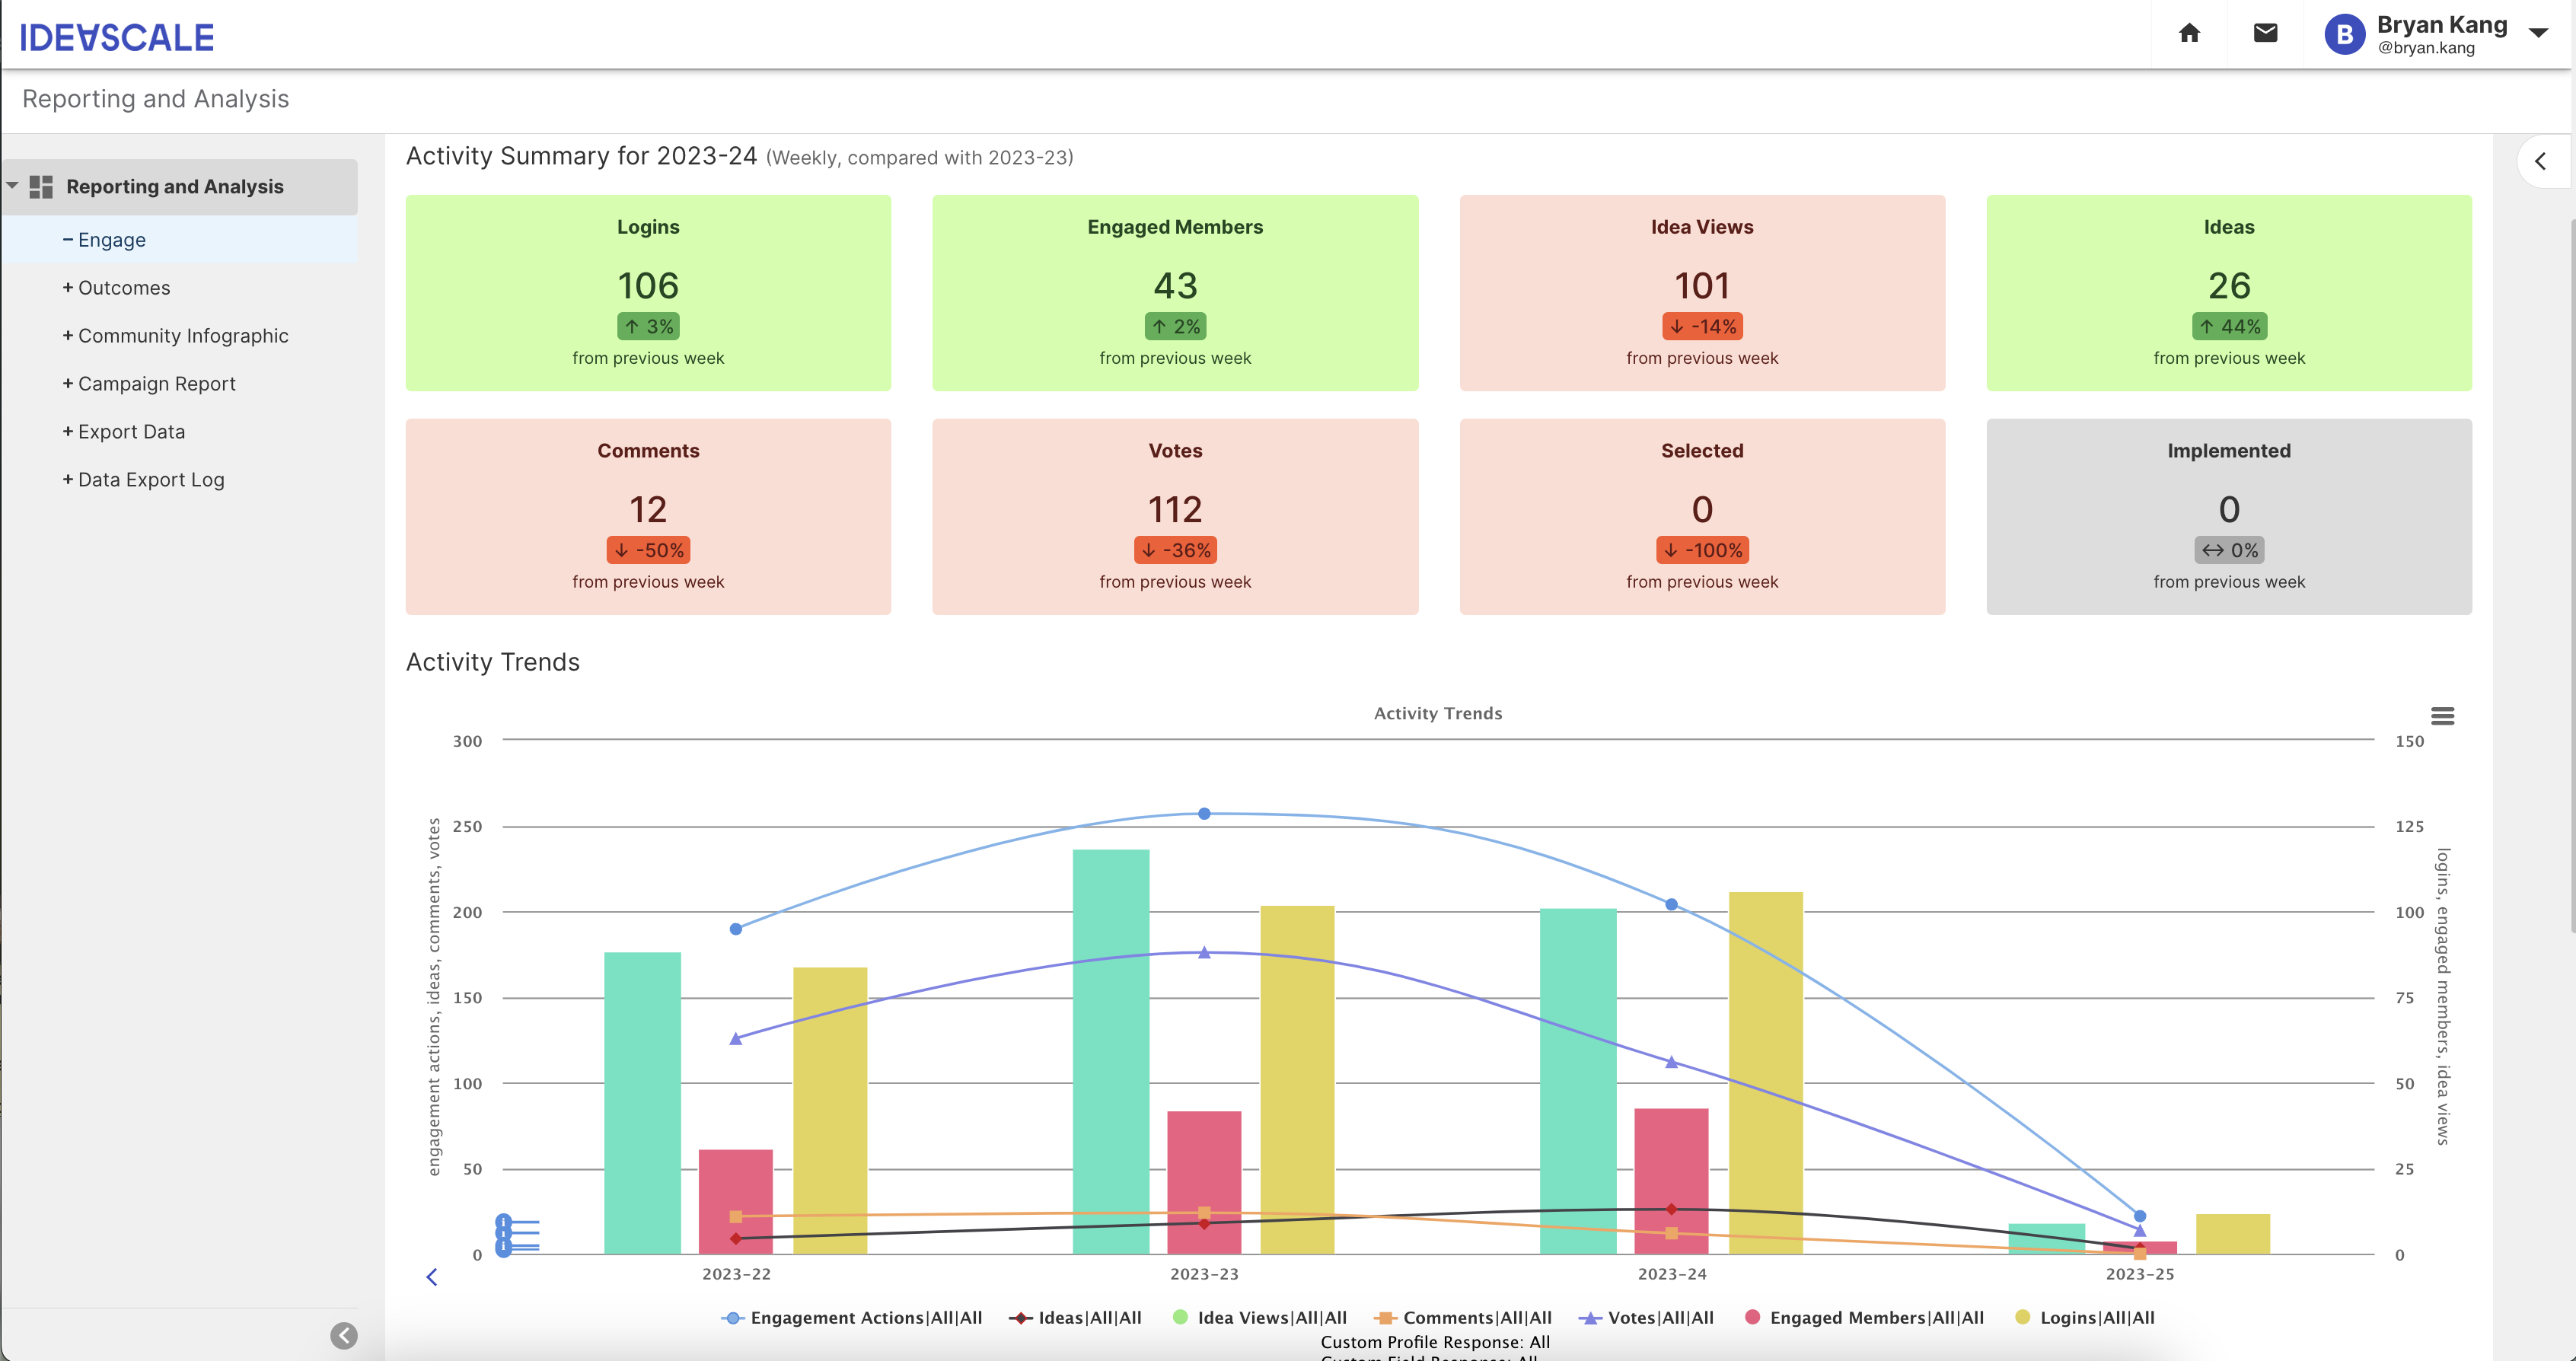 IdeaScale Software - Reporting & Analytics: Gain detailed insights from your campaigns and community, with minute data on ideas, usage, engagement, and more.